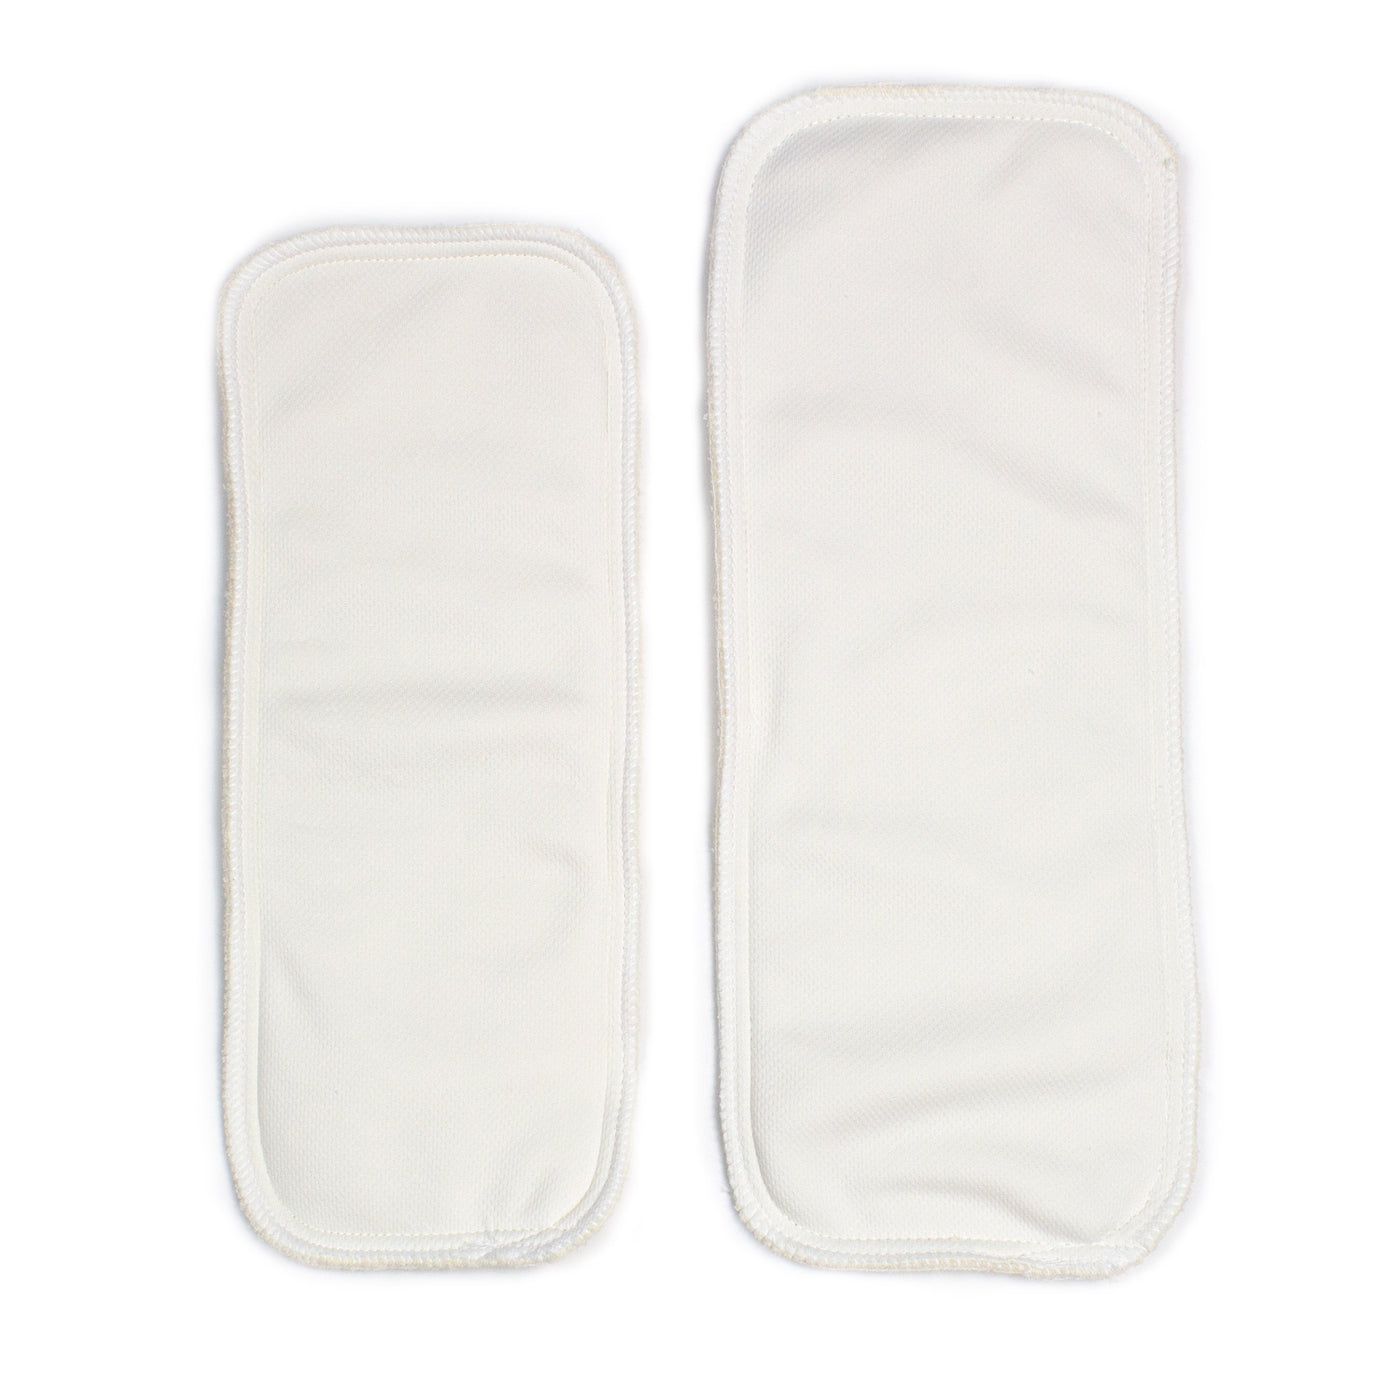 motherease sandys diaper liners doublers